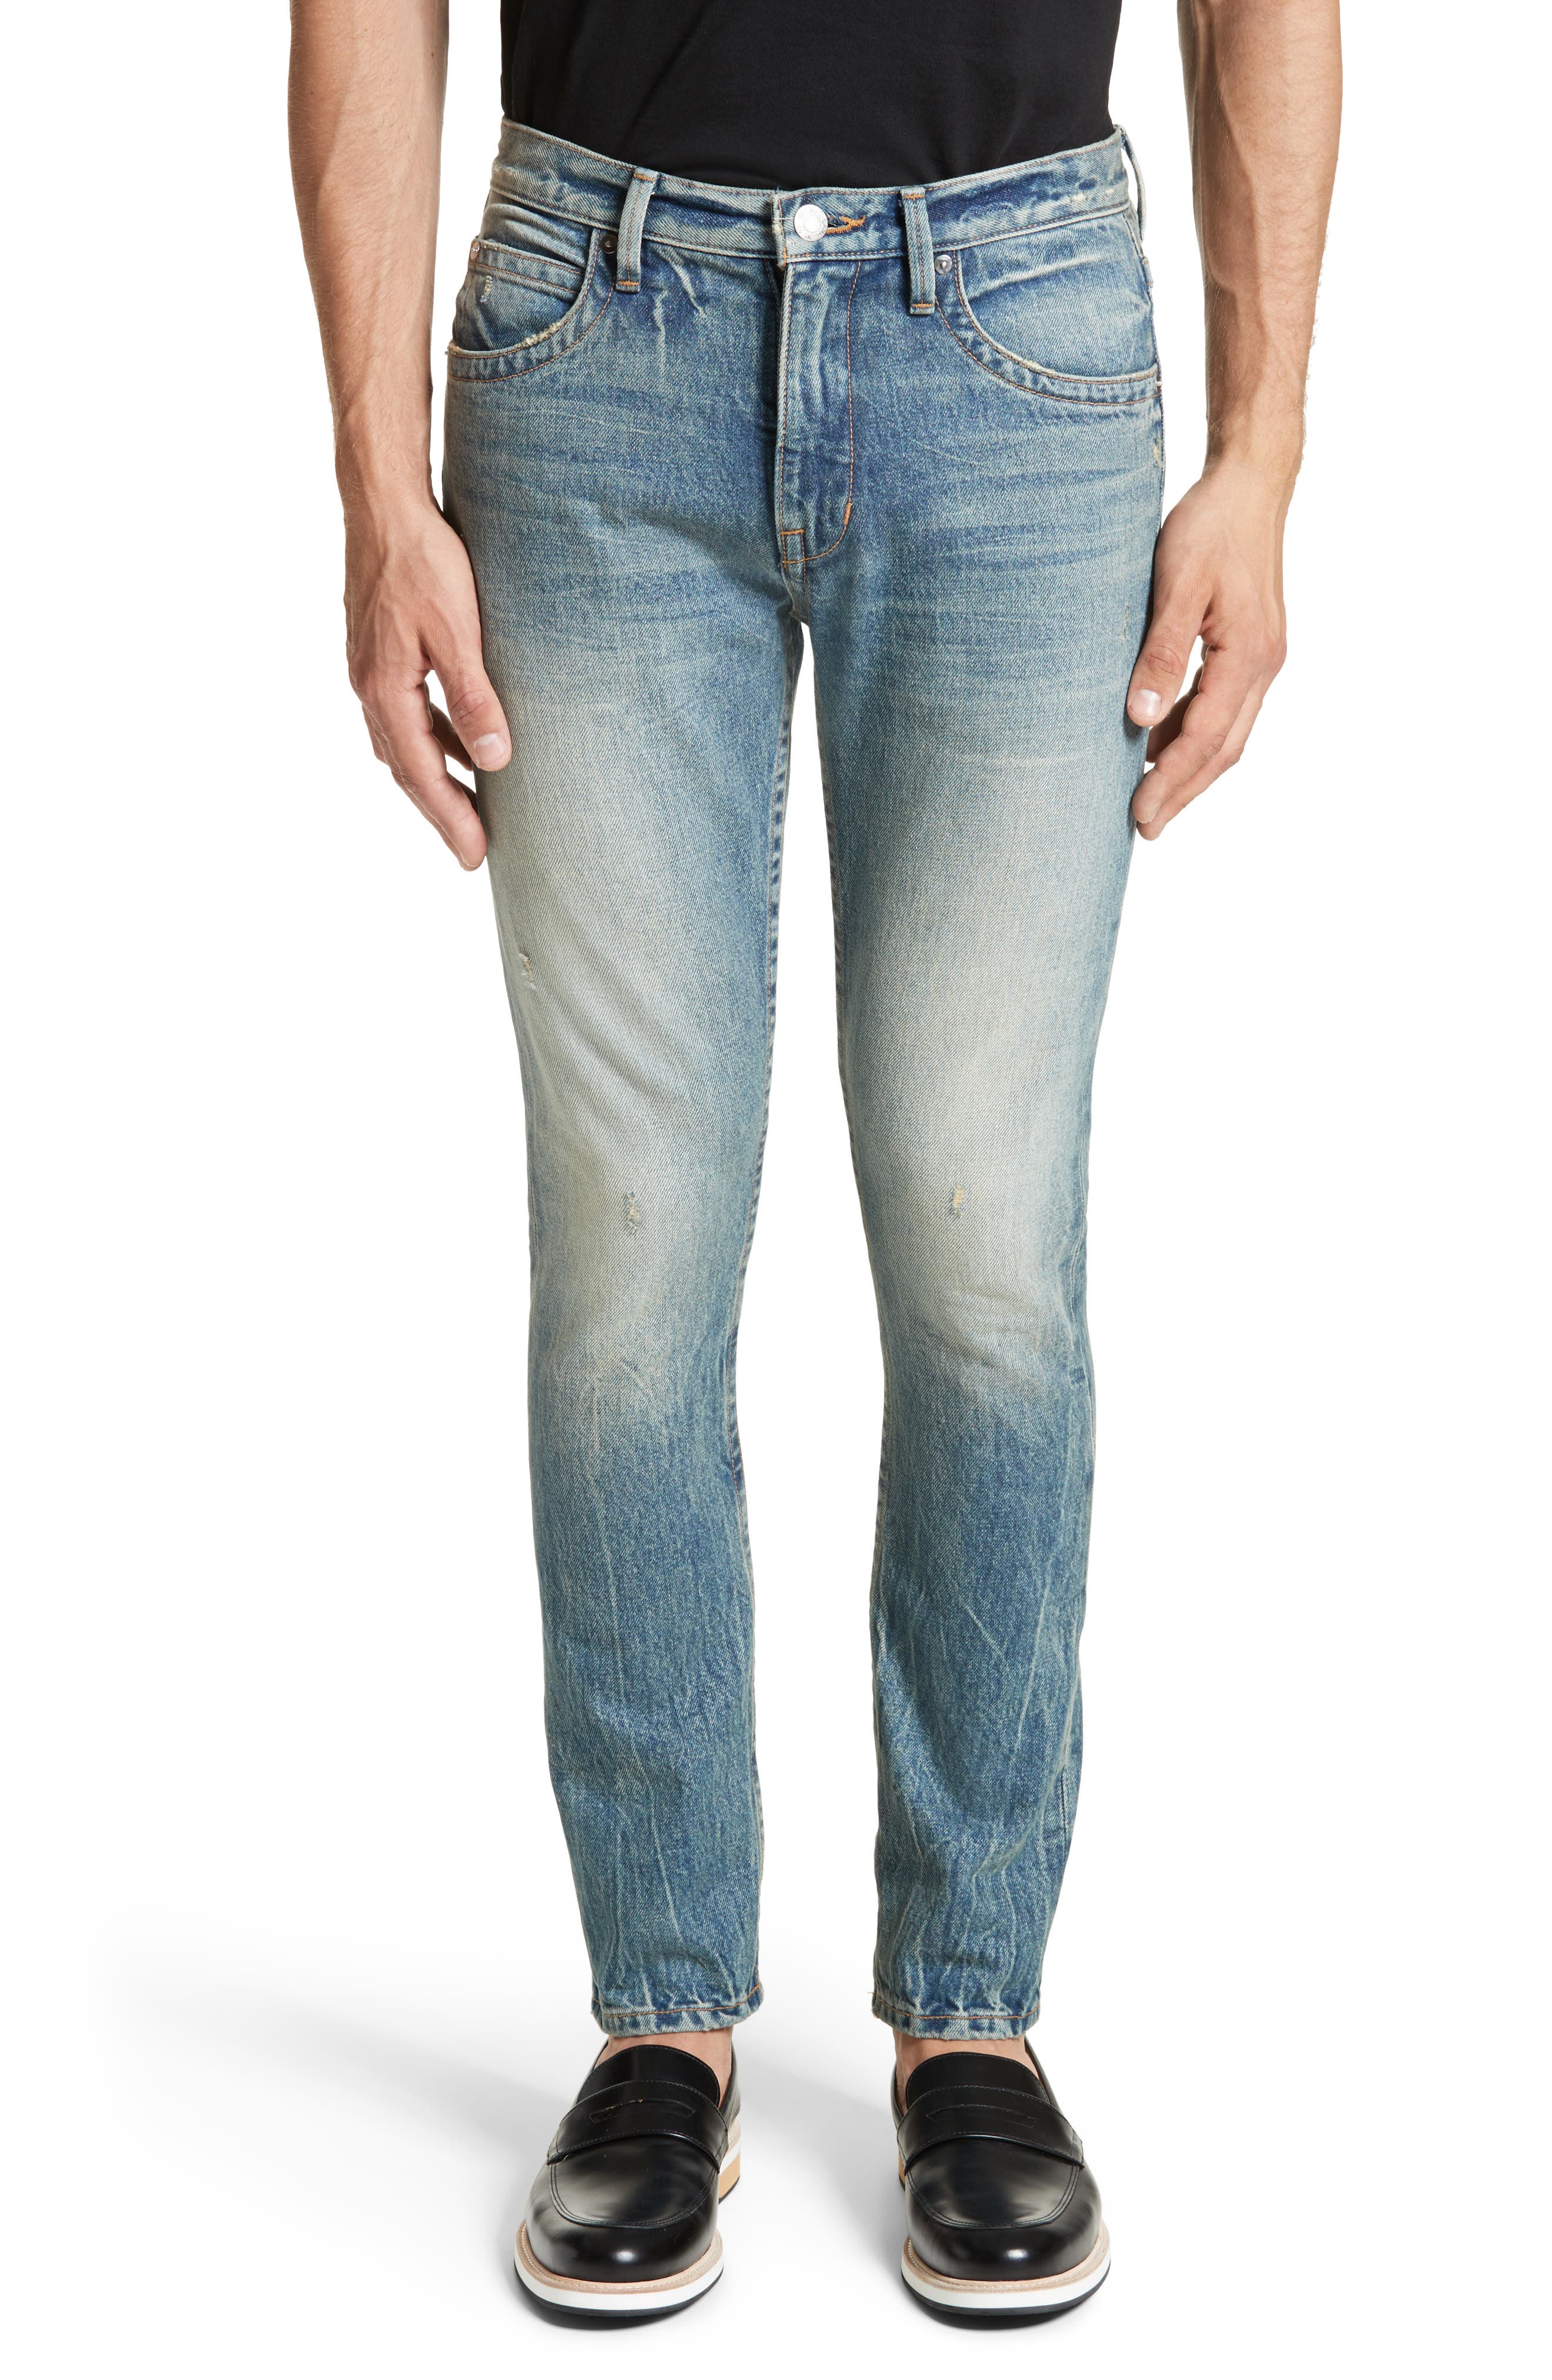 low rise work jeans